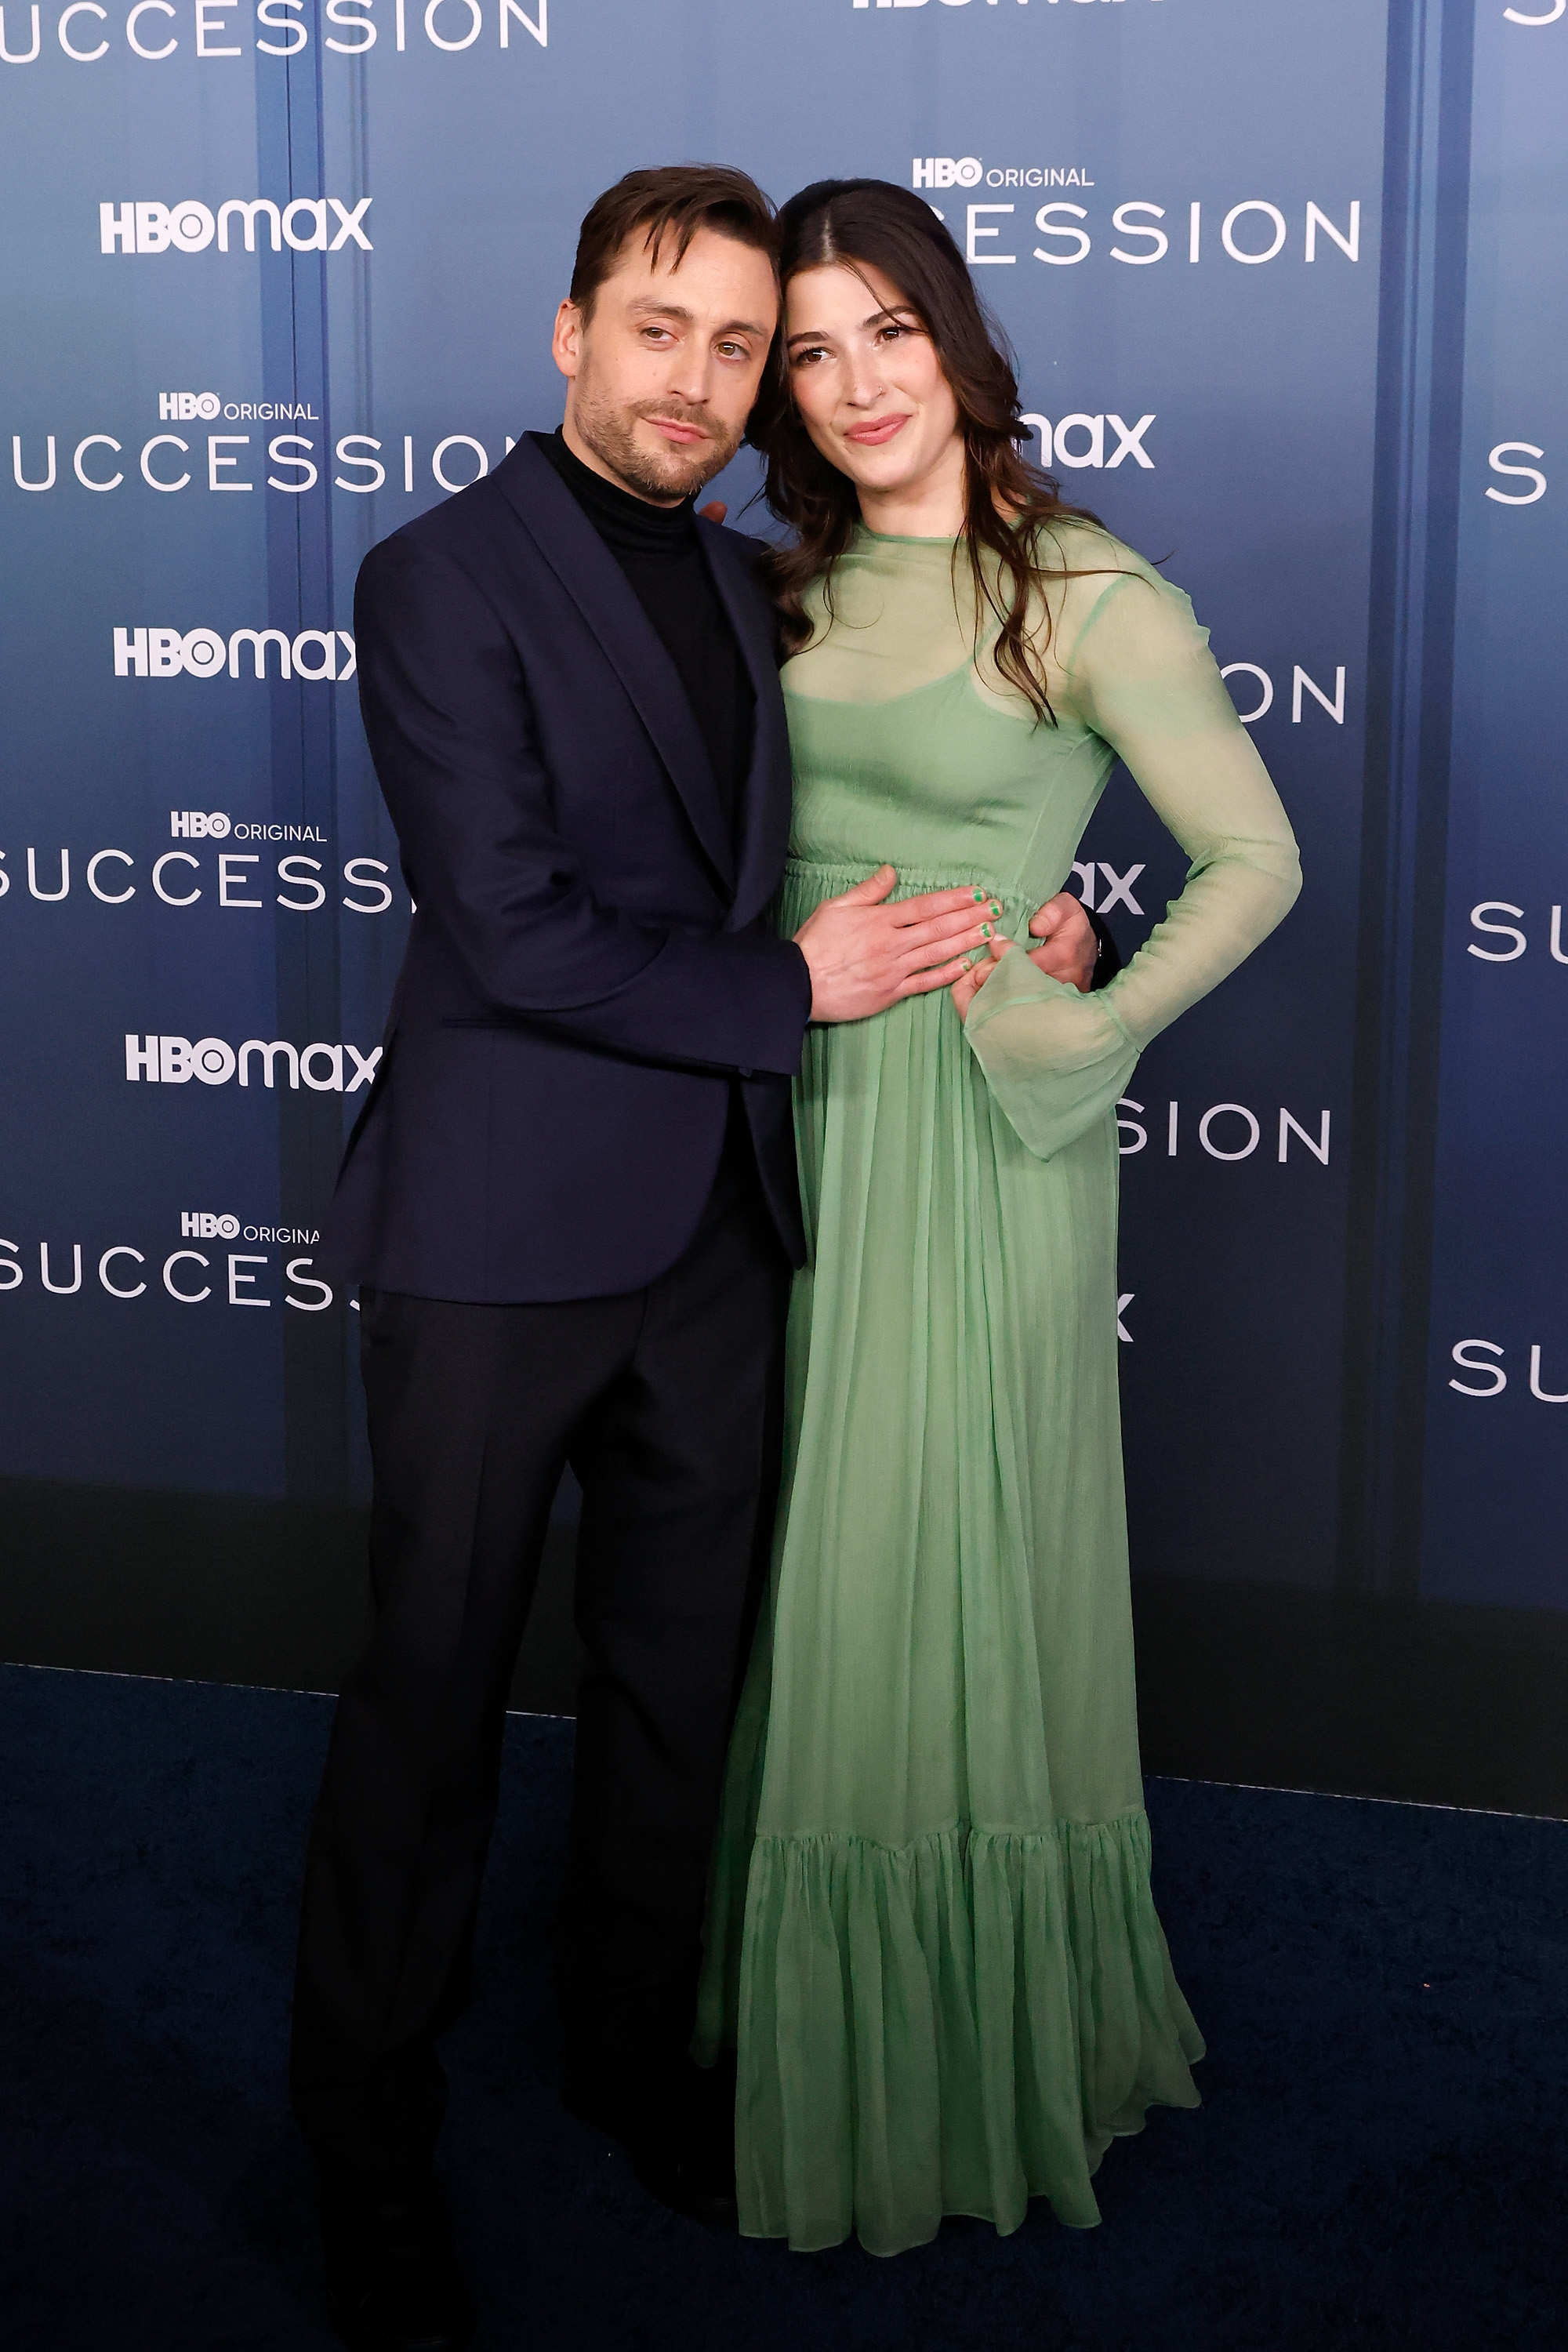 Kieran Culkin and Jazz Charton attend the Season 4 premiere of HBO's "Succession" at Jazz at Lincoln Center on March 20, 2023, in New York City. | Source: Getty Images